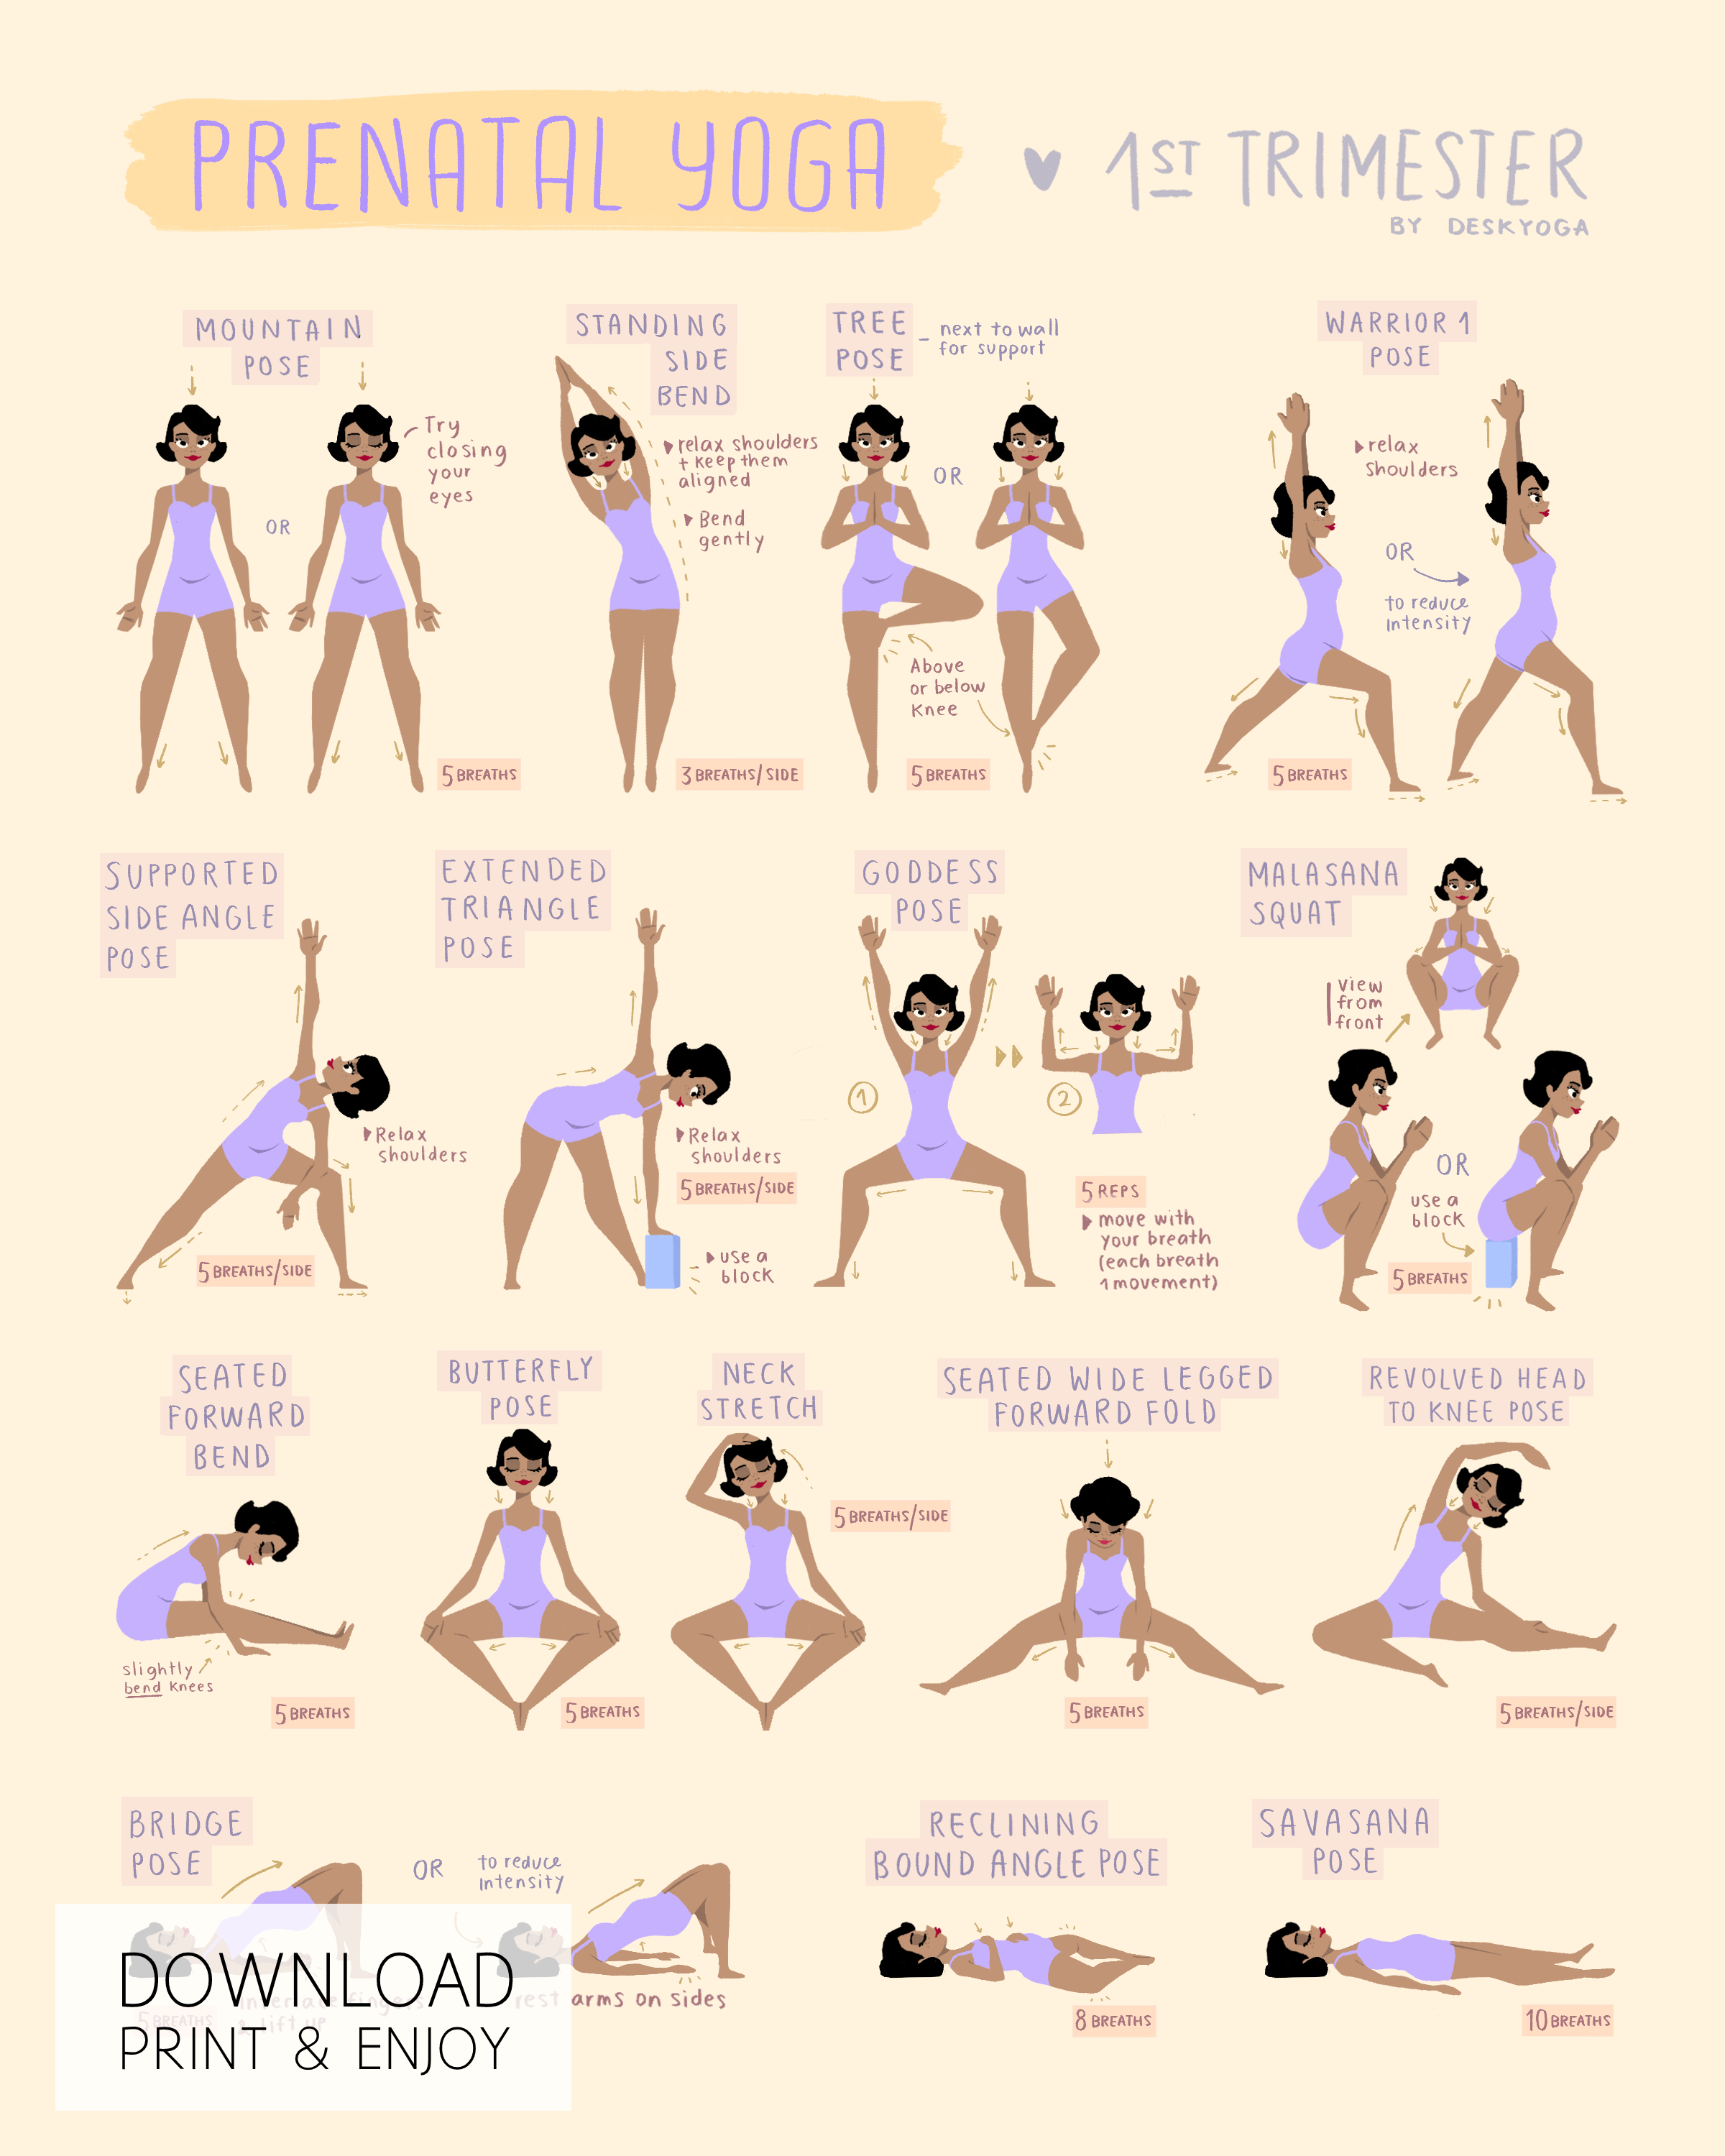 Empowering Prenatal Yoga for Every Trimester